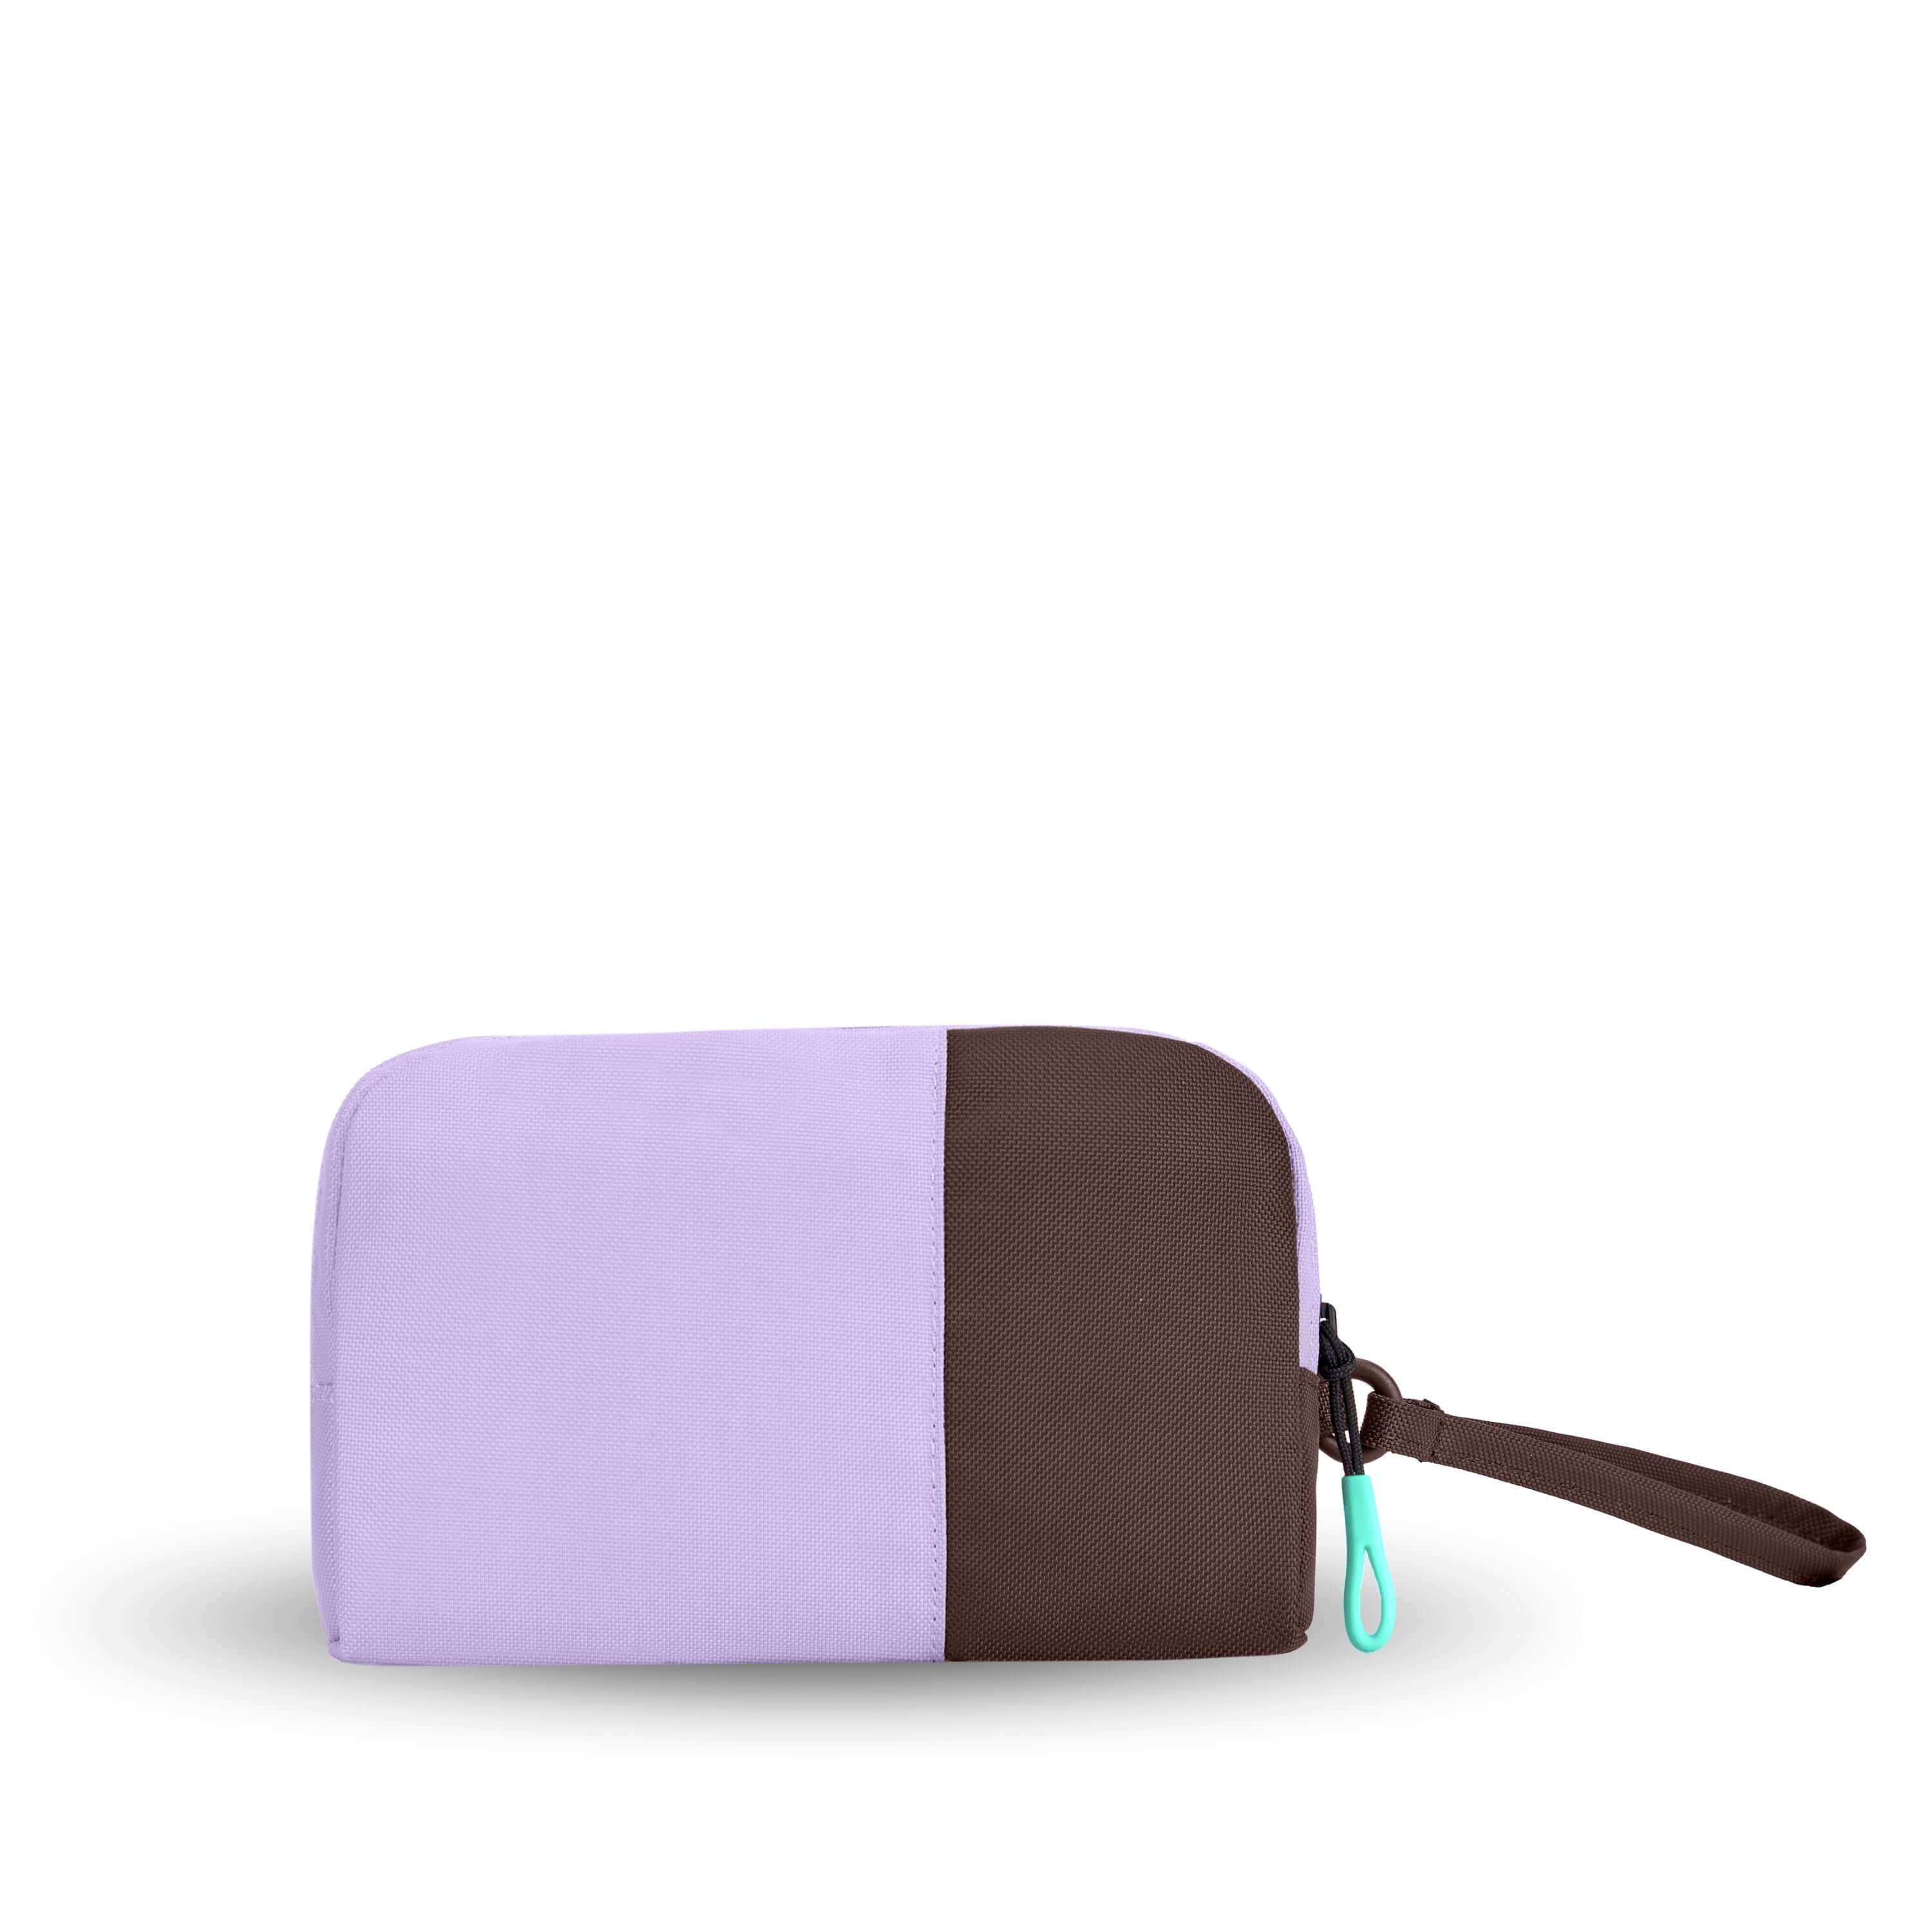 Back view of Sherpani travel accessory, the Jolie in Lavender, in small size. The pouch is two-toned in lavender and brown. It features a brown wristlet strap and an easy-pull zipper accented in aqua.